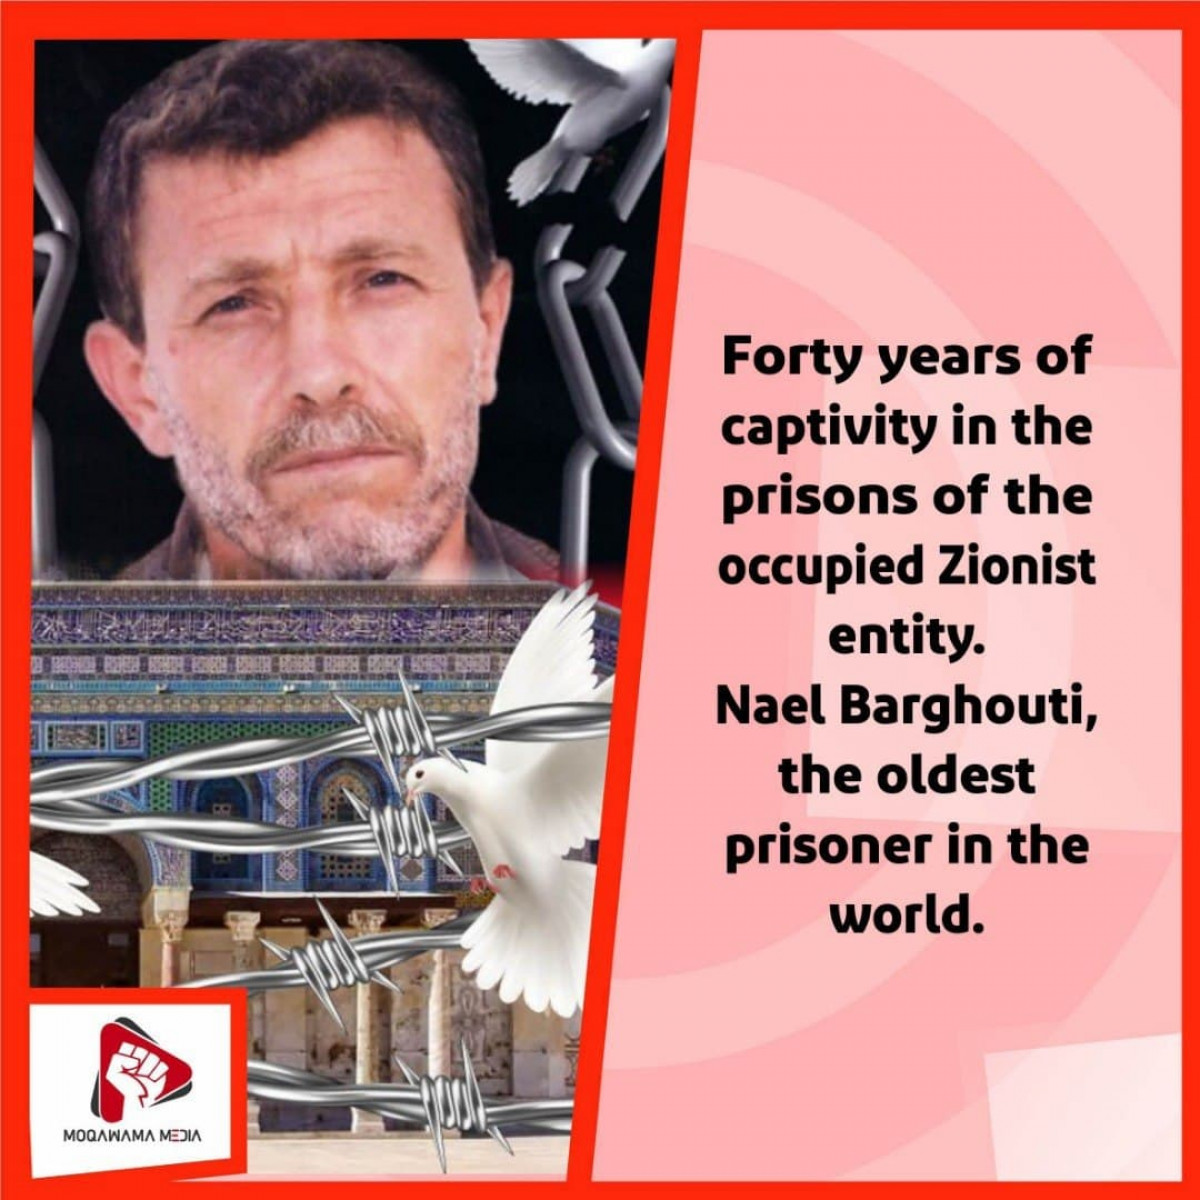 Forty years of captivity in the prisons of the occupied Zionist entity